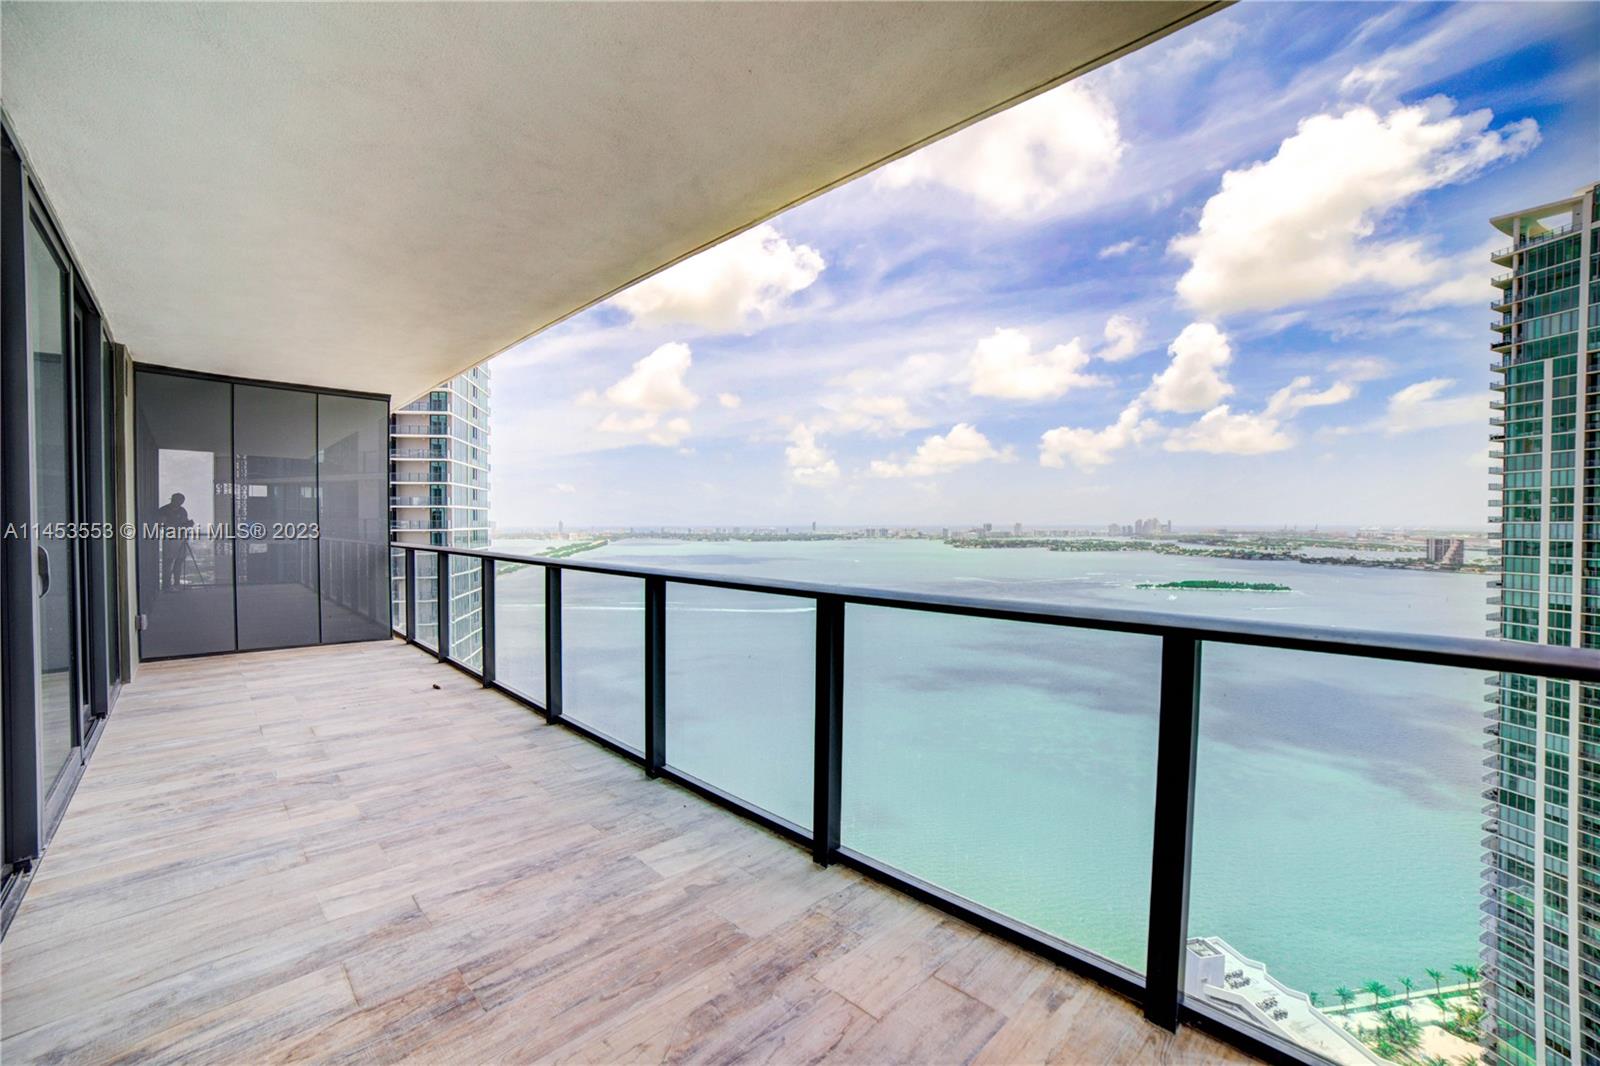 650 NE 32nd St 4001, Miami, Florida 33137, 4 Bedrooms Bedrooms, ,4 BathroomsBathrooms,Residential,For Sale,650 NE 32nd St 4001,A11453553